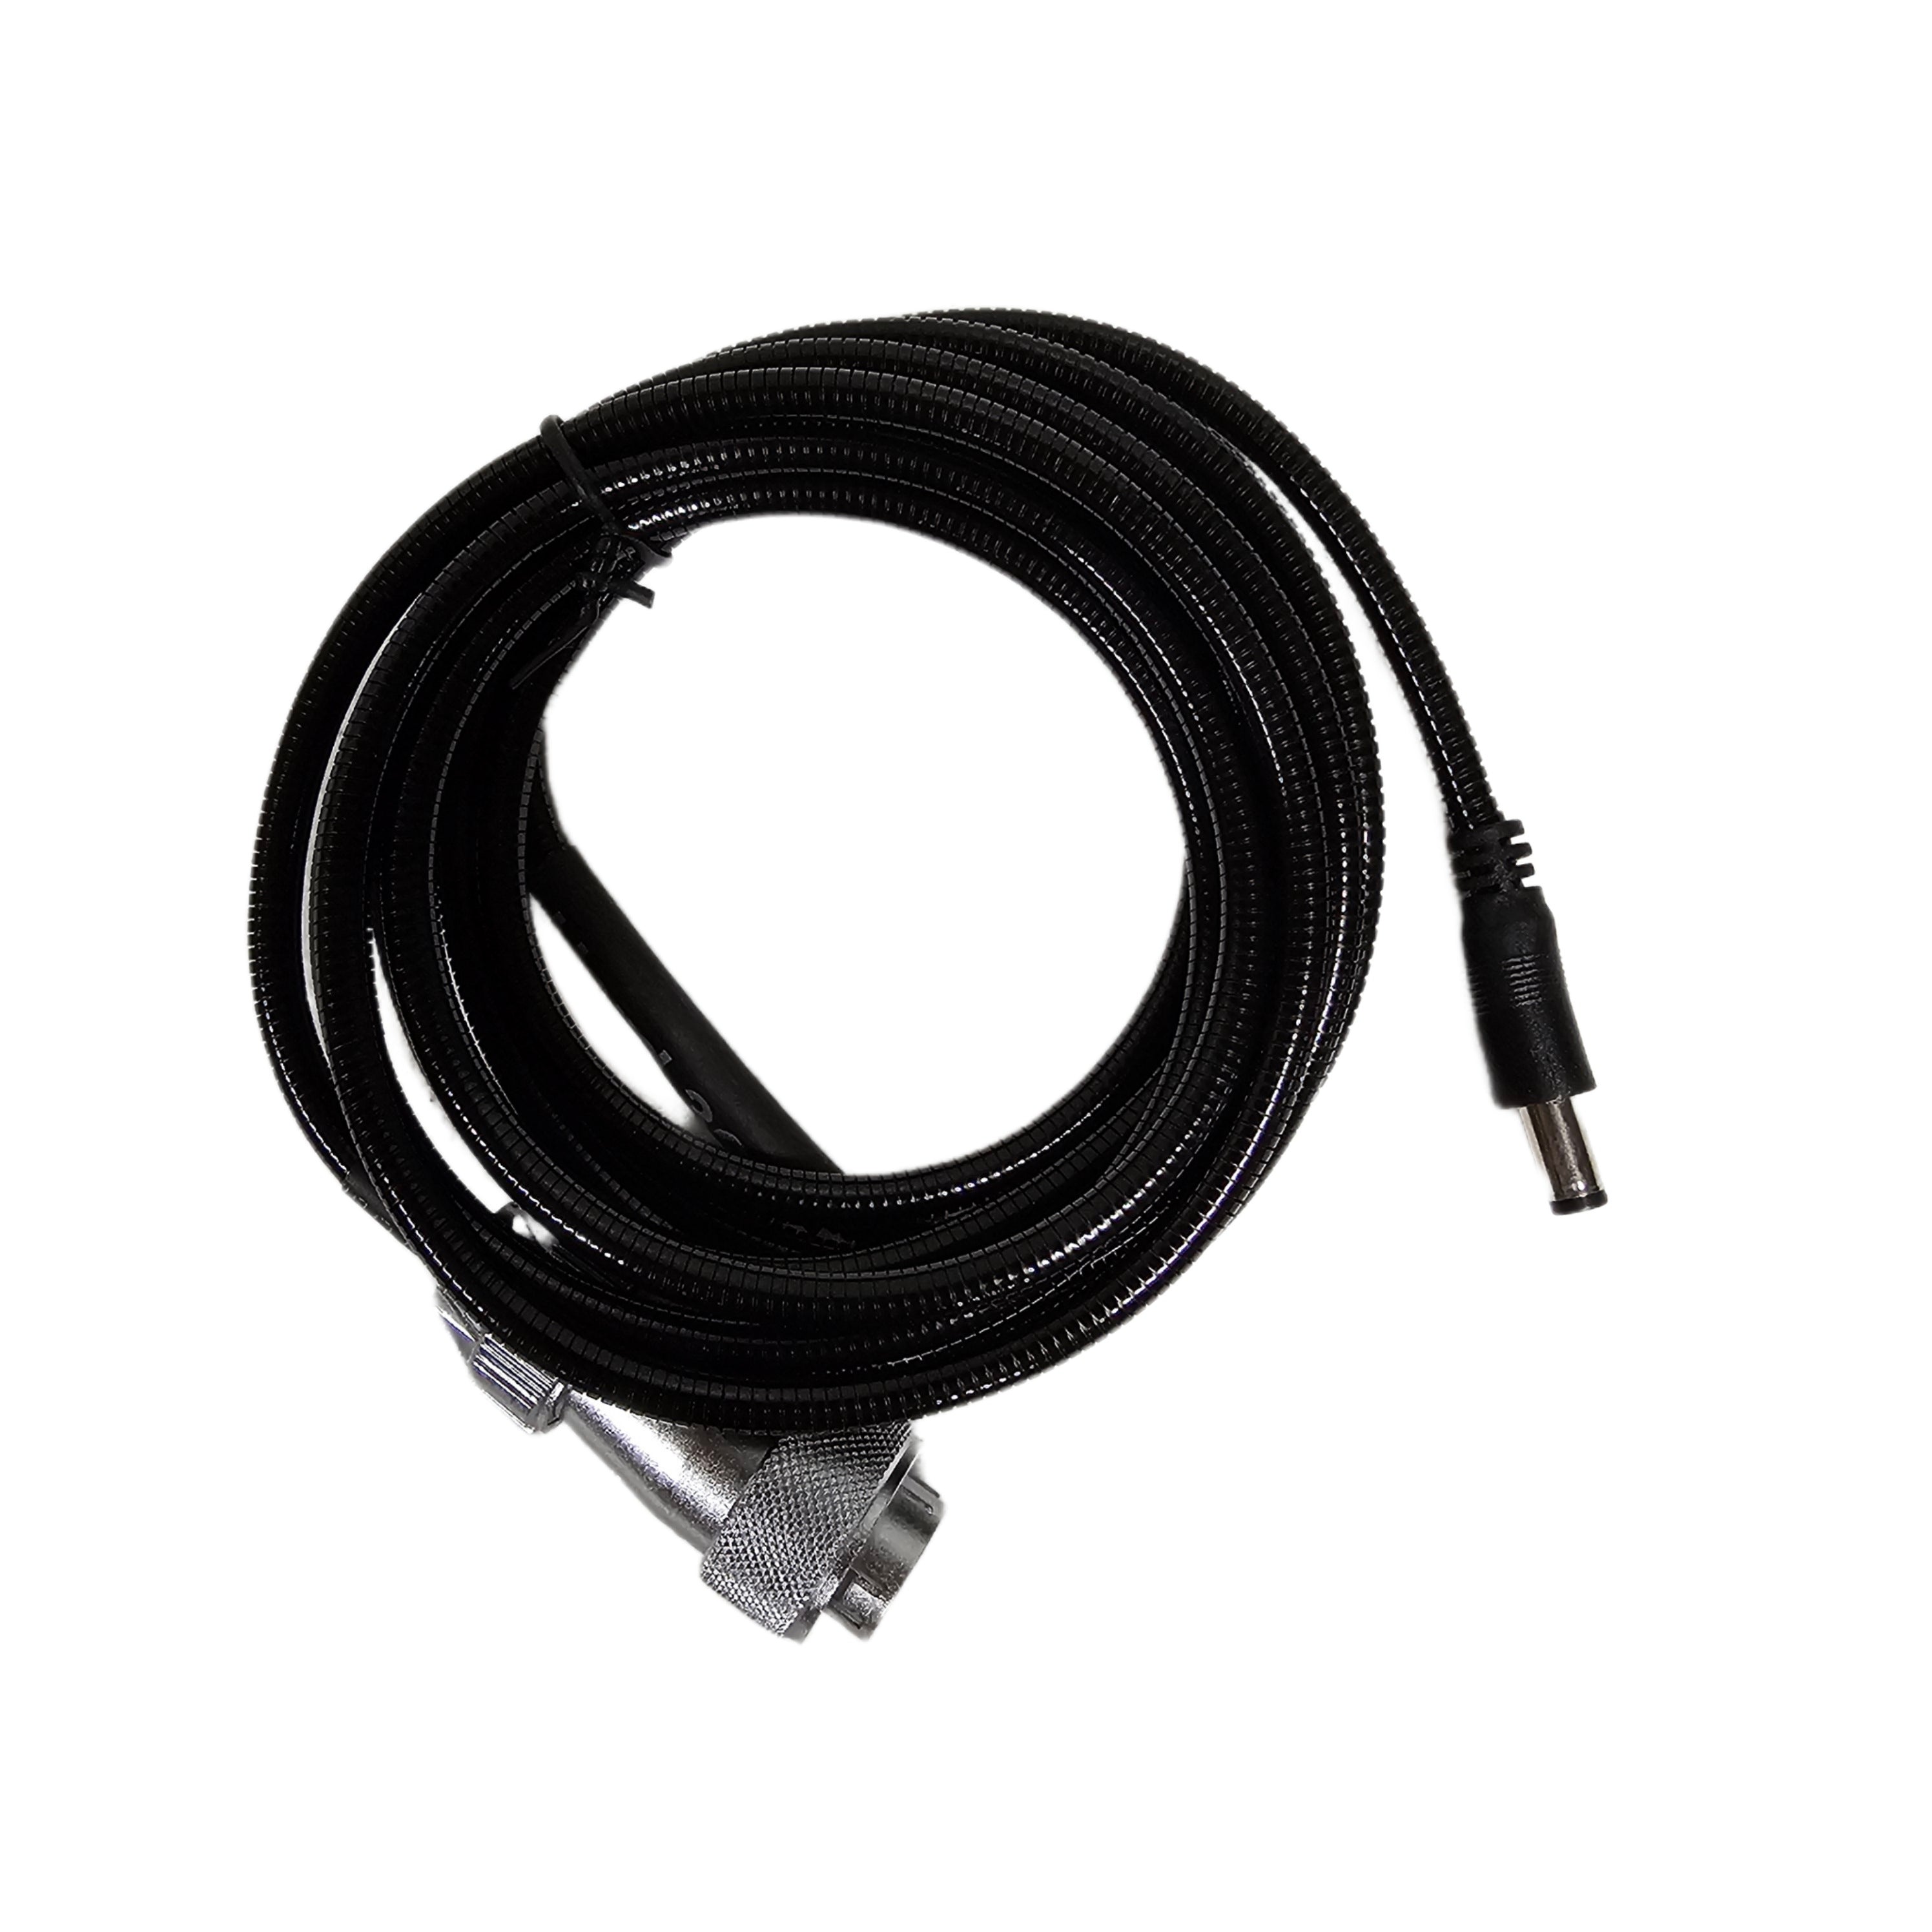 Power Pack 1800 Camera Power Cable